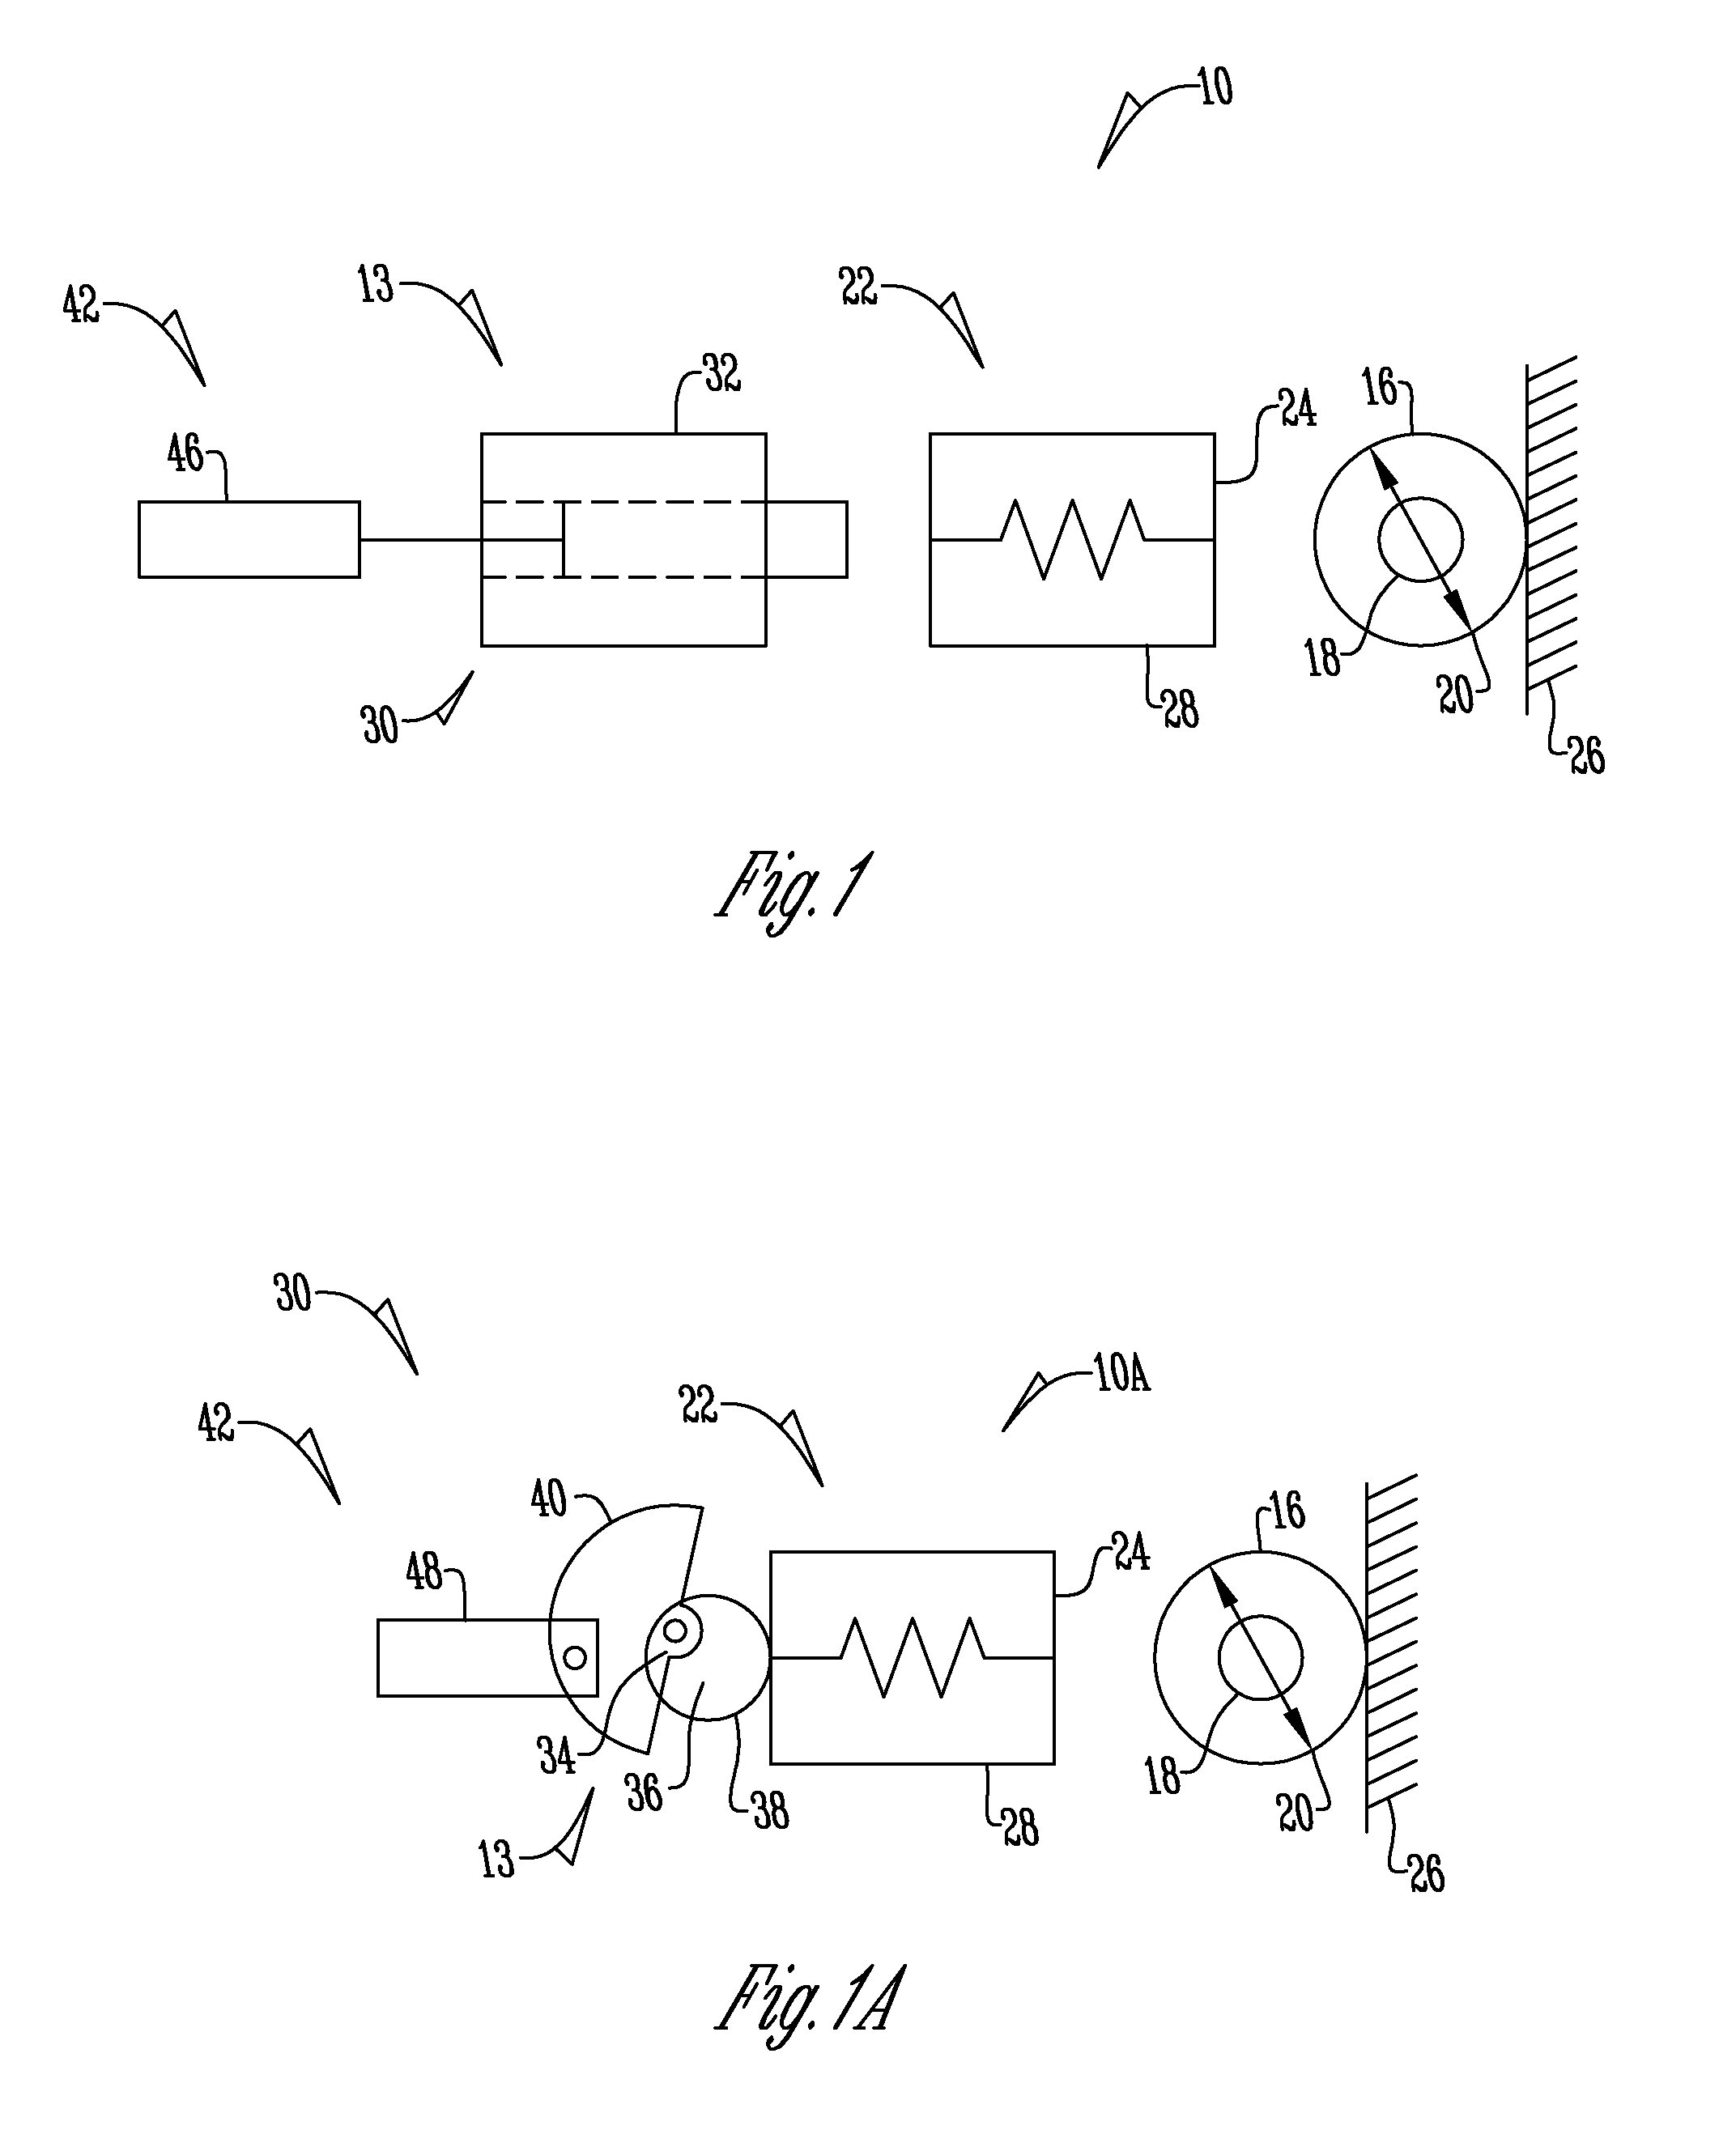 Fluid flow rate compensation system using an integrated conductivity sensor to monitor tubing changes